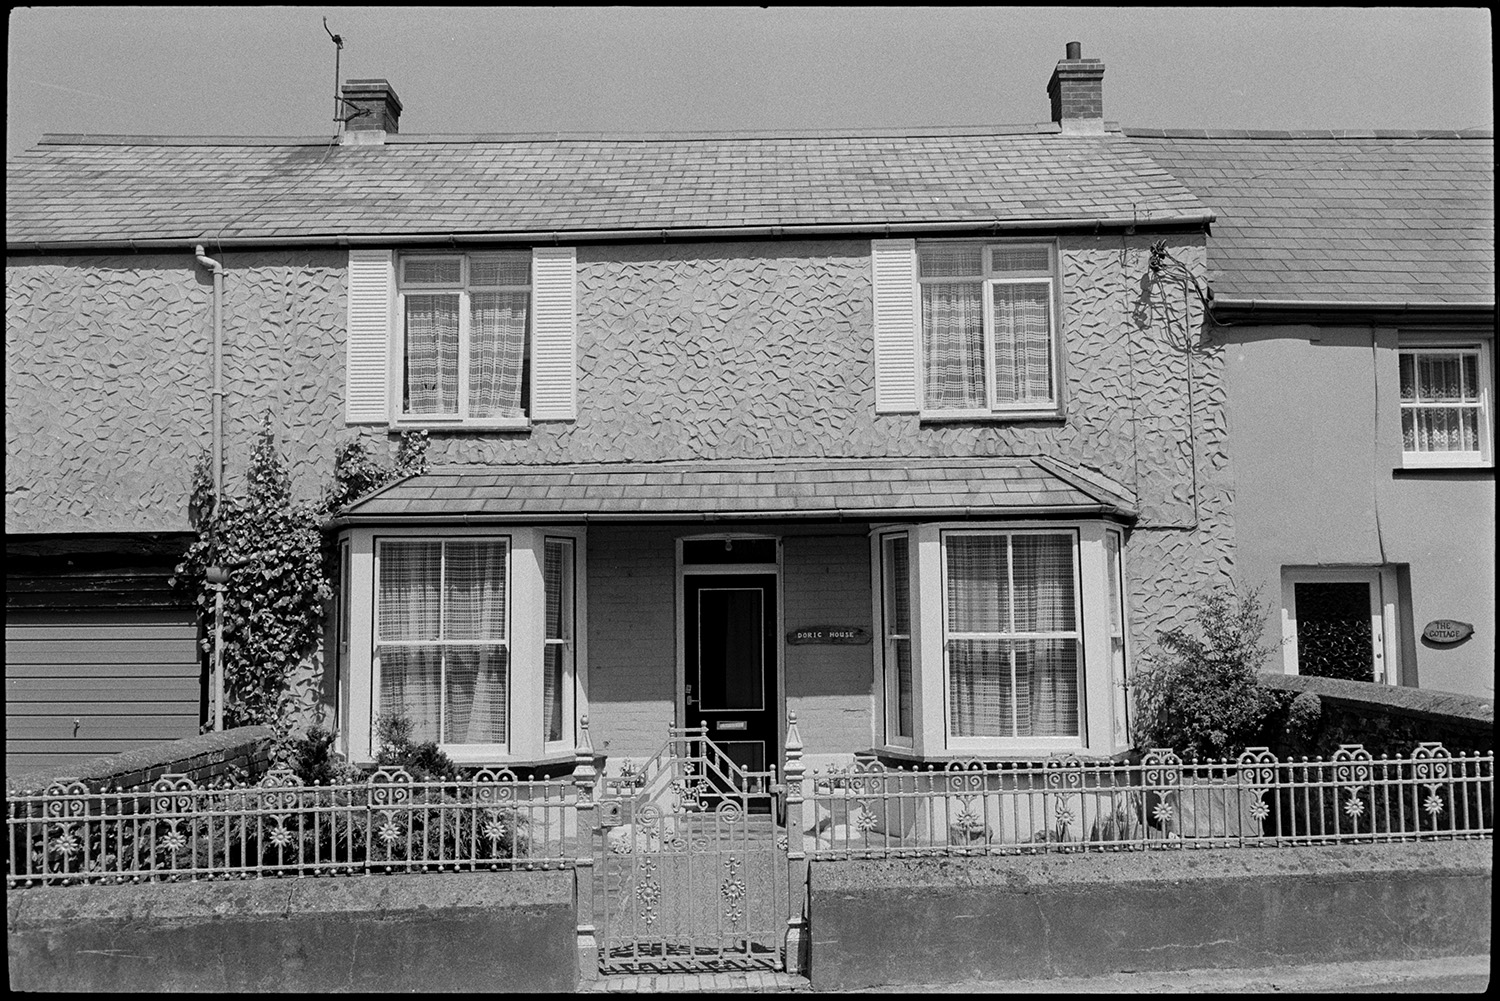 House, comparison with old photo.
[Front view of Doric House, North Road, High Bickington. This house used to be a Saddler's shop. The upstairs windows have shutters.]